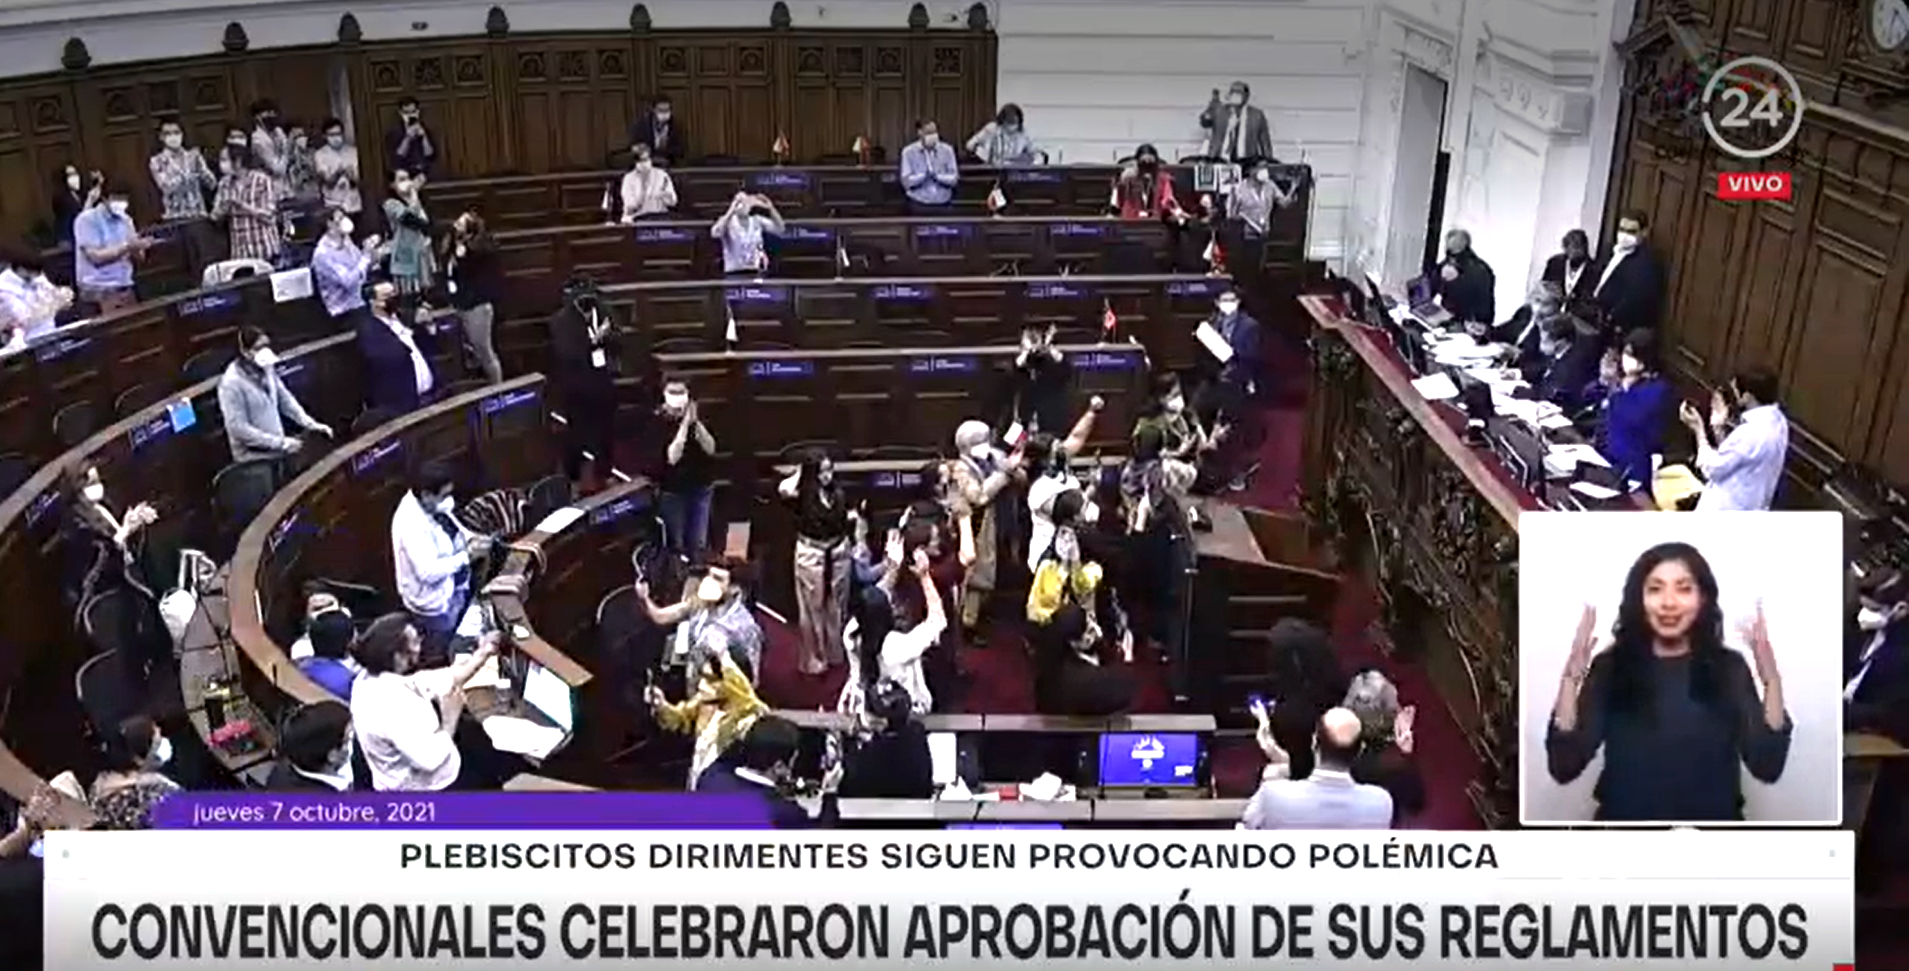 Constitutional Convention delegates celebrate the approval of the rules of procedure (photo credit: Televisión Nacional de Chile)